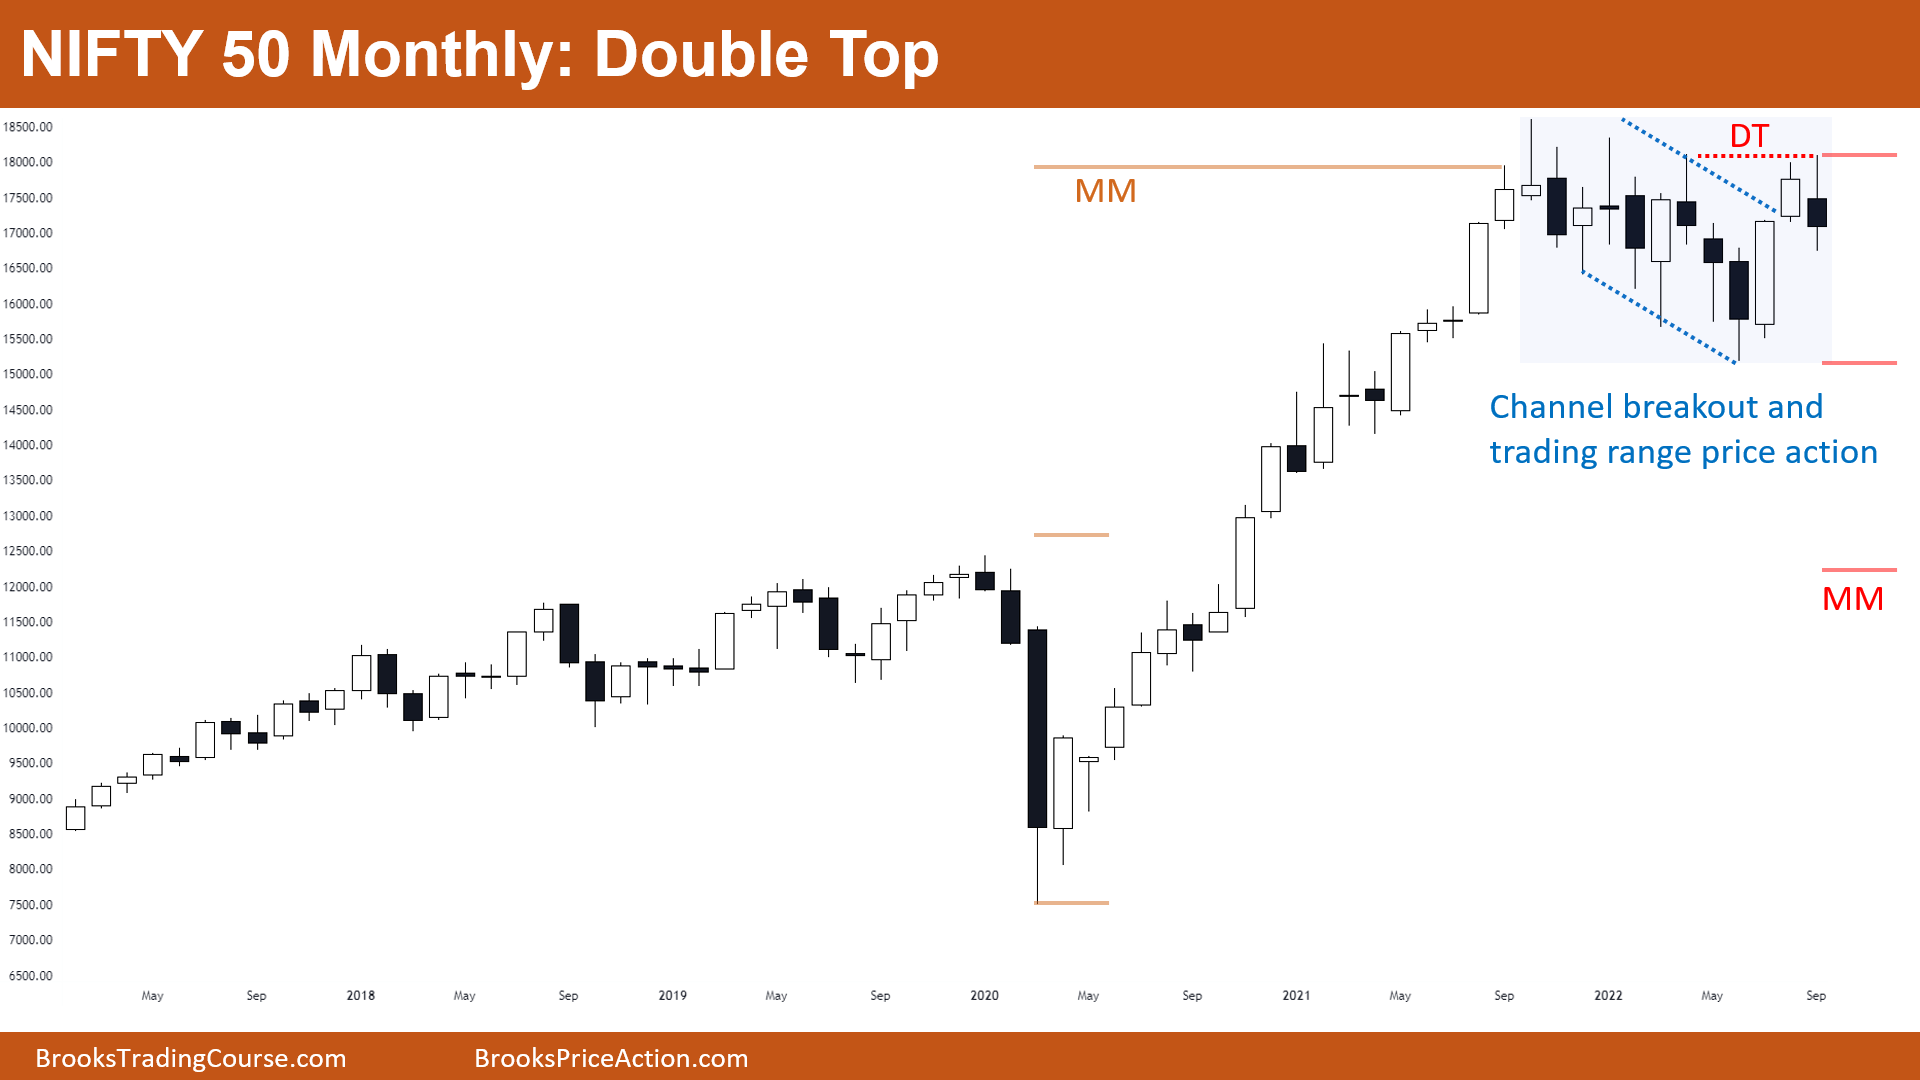 Nifty 50 Double Top and Increased Trading Range Action